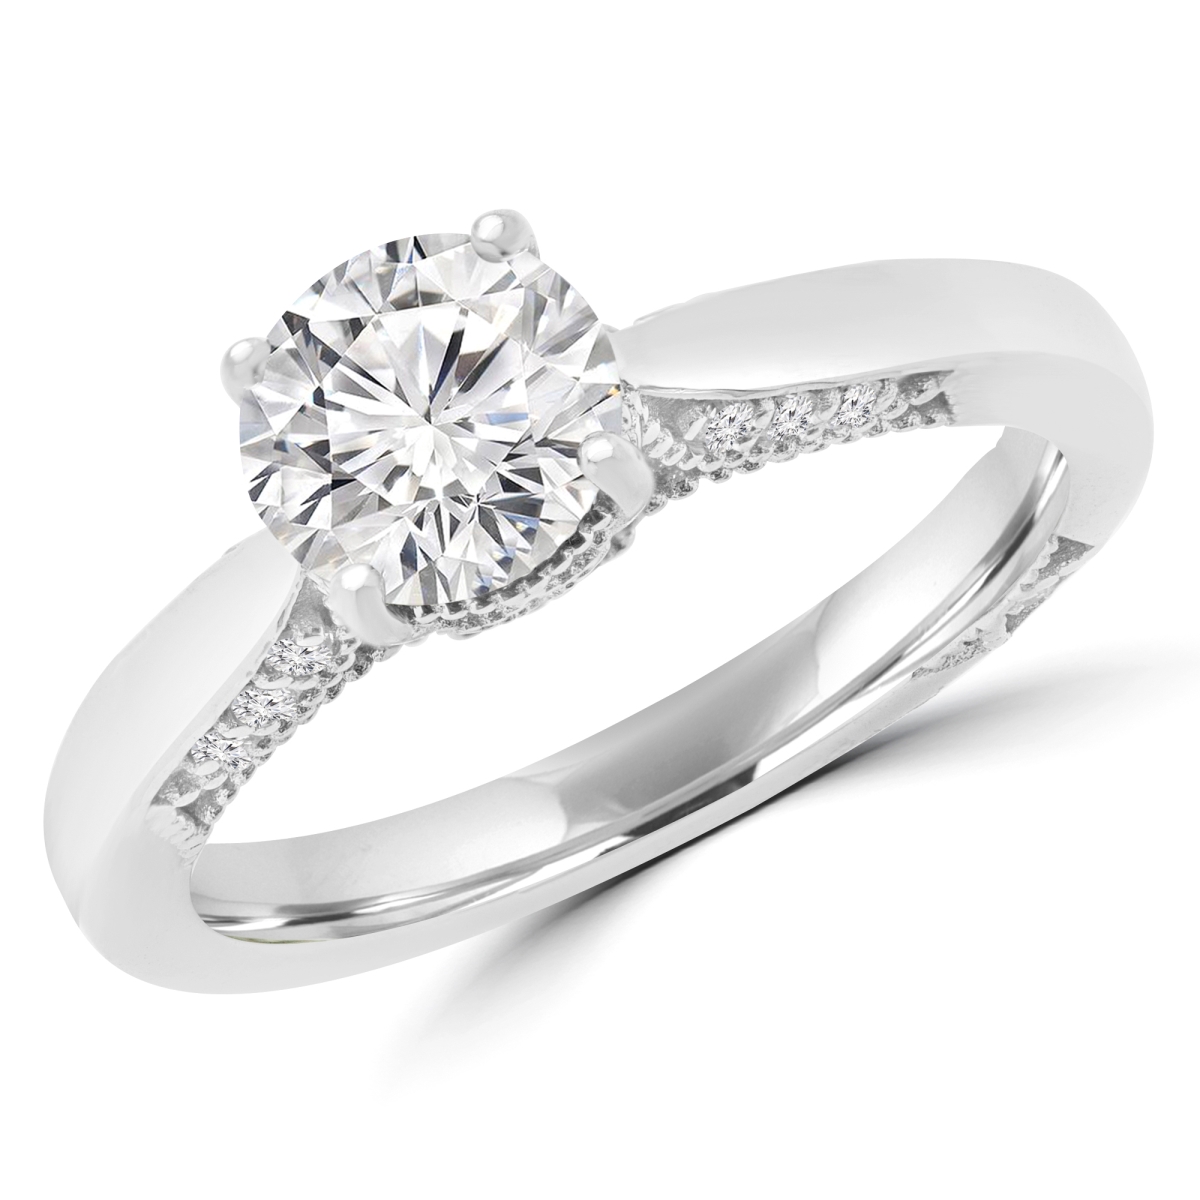 Picture of Majesty Diamonds MD170228-7.75 1.12 CTW Round Diamond Solitaire with Accents Engagement Ring in 18K White Gold - Size 7.75